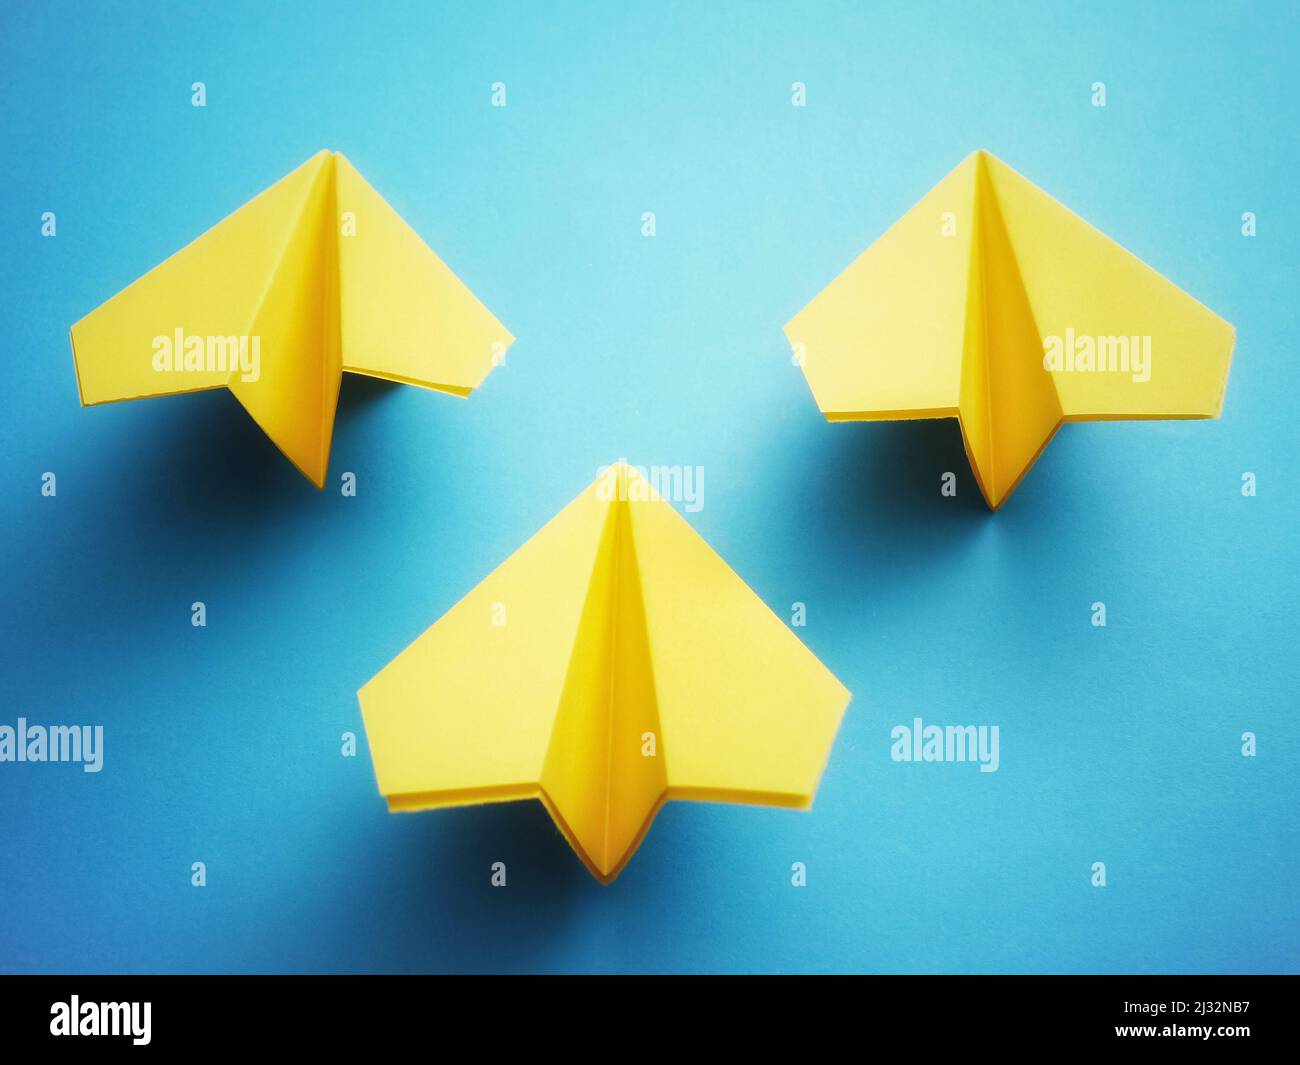 Group of three yellow paper jets on blue background. Stock Photo